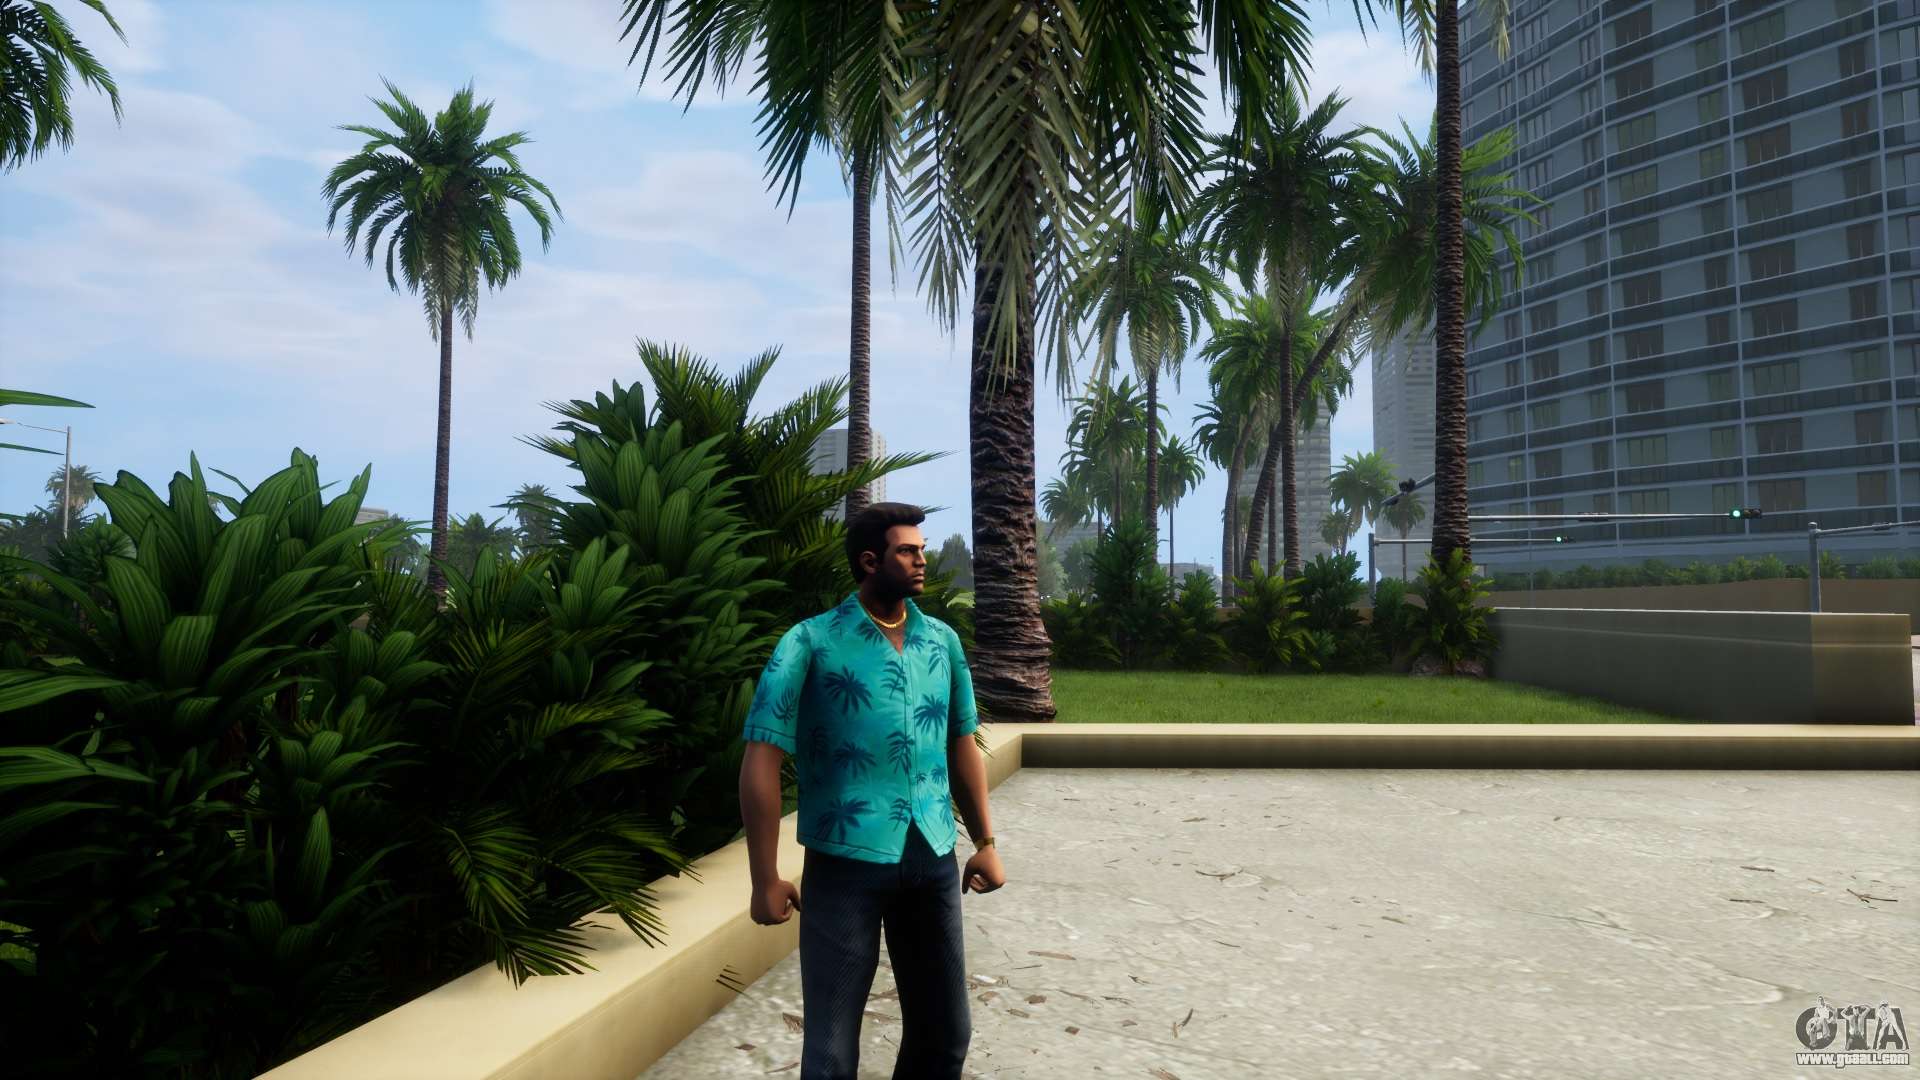 Gold Chain for GTA Vice City Definitive Edition